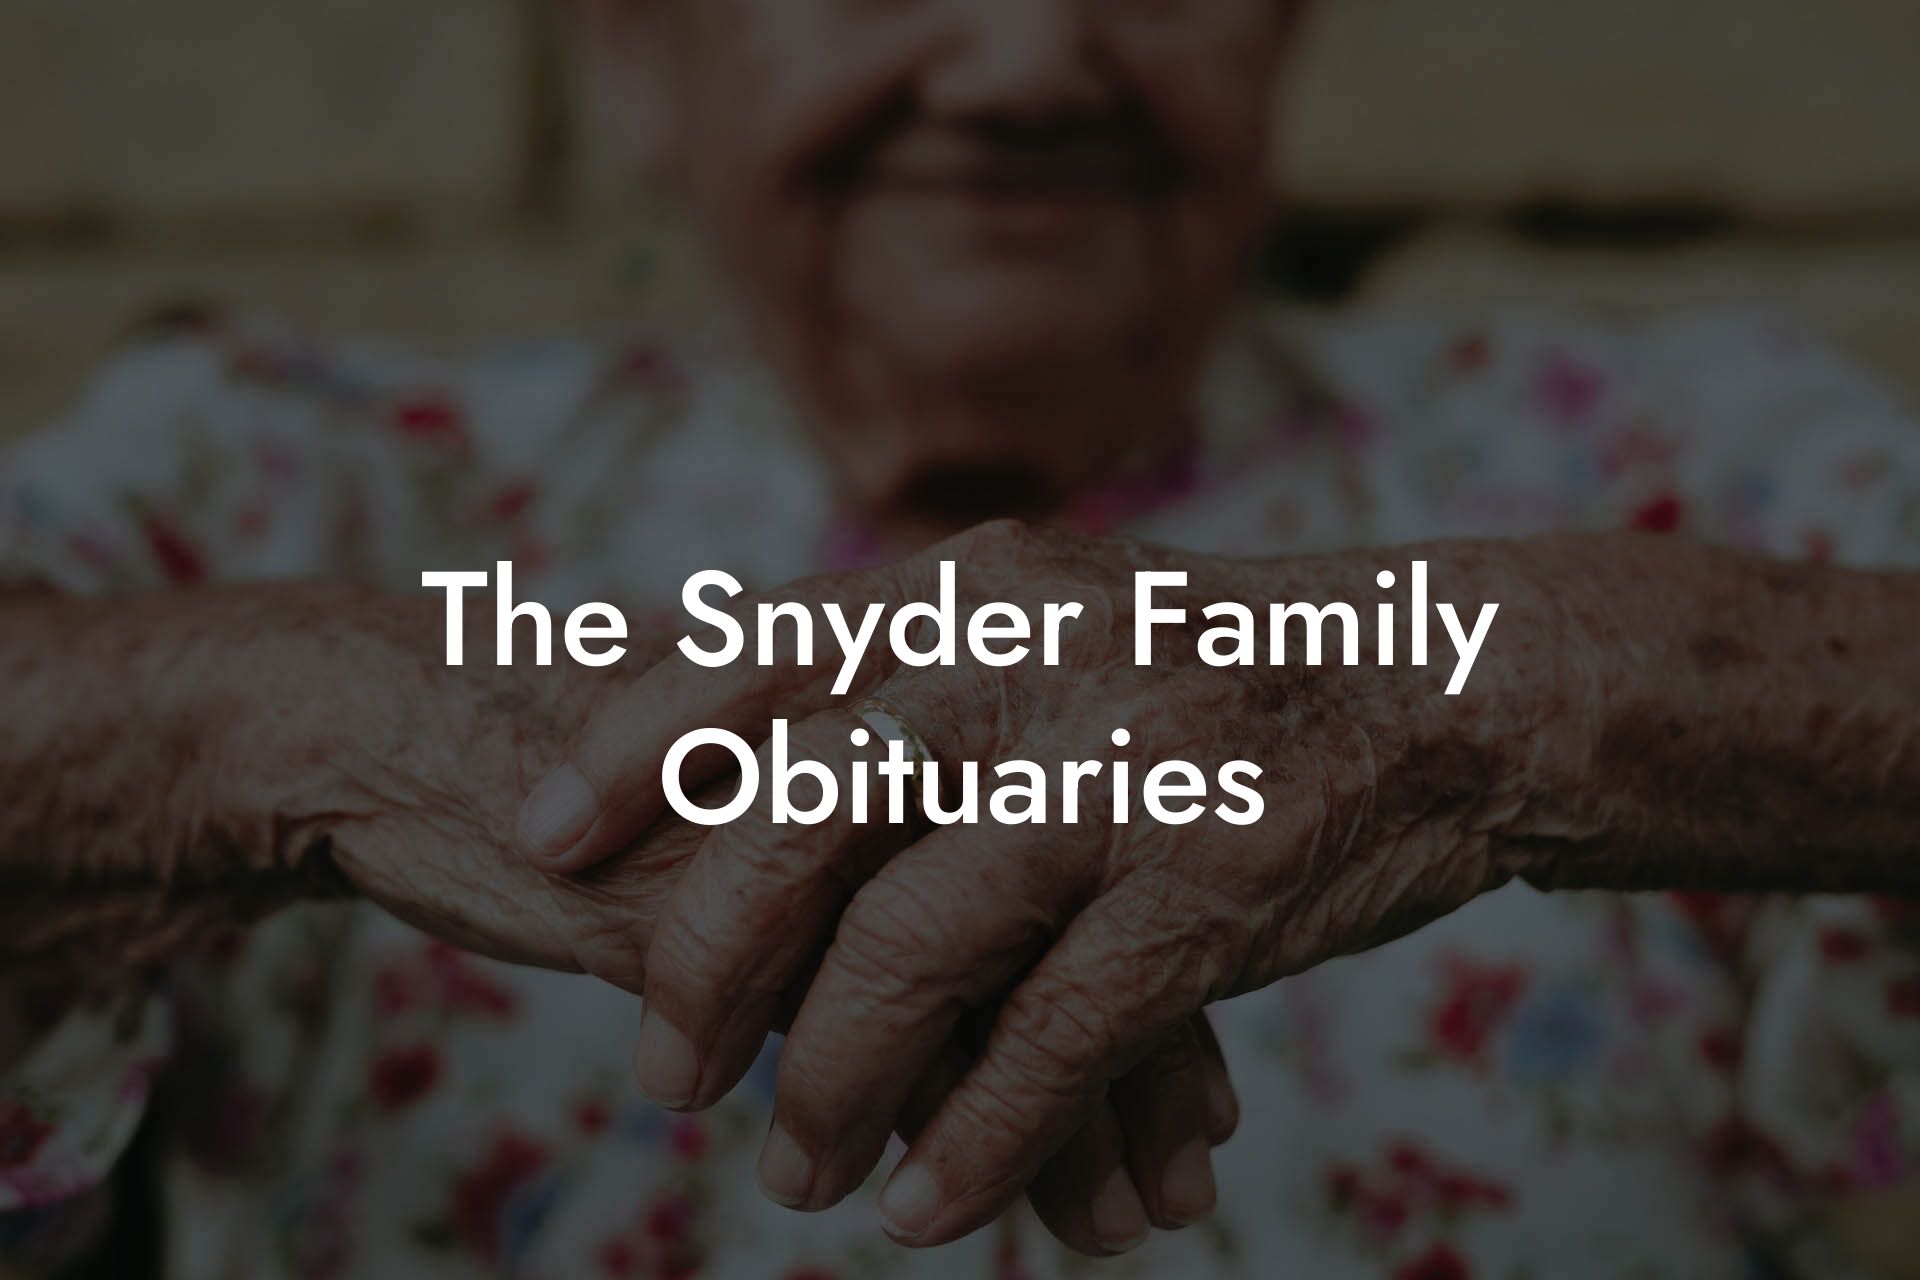 The Snyder Family Obituaries